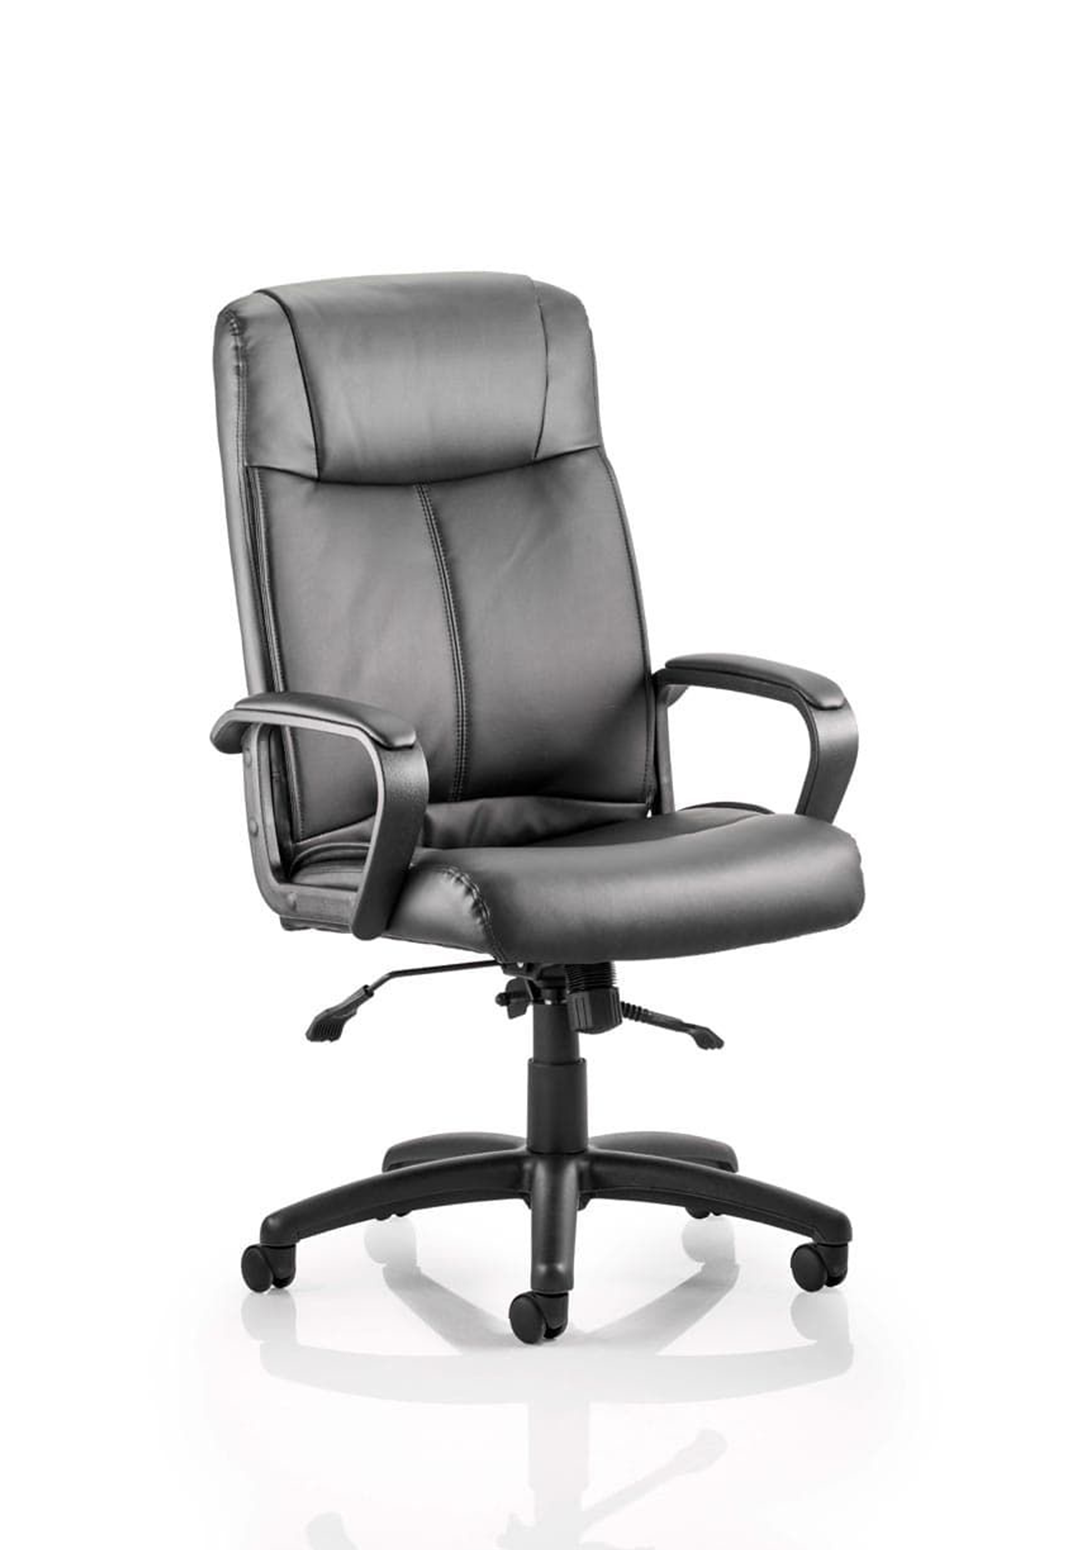 Plaza Exec Home Office Chair | Executive Chair | Home Office Furniture | Leather Home Office Chair | Leather Executive Chair | Swivel Chair | Swivel Executive Chair